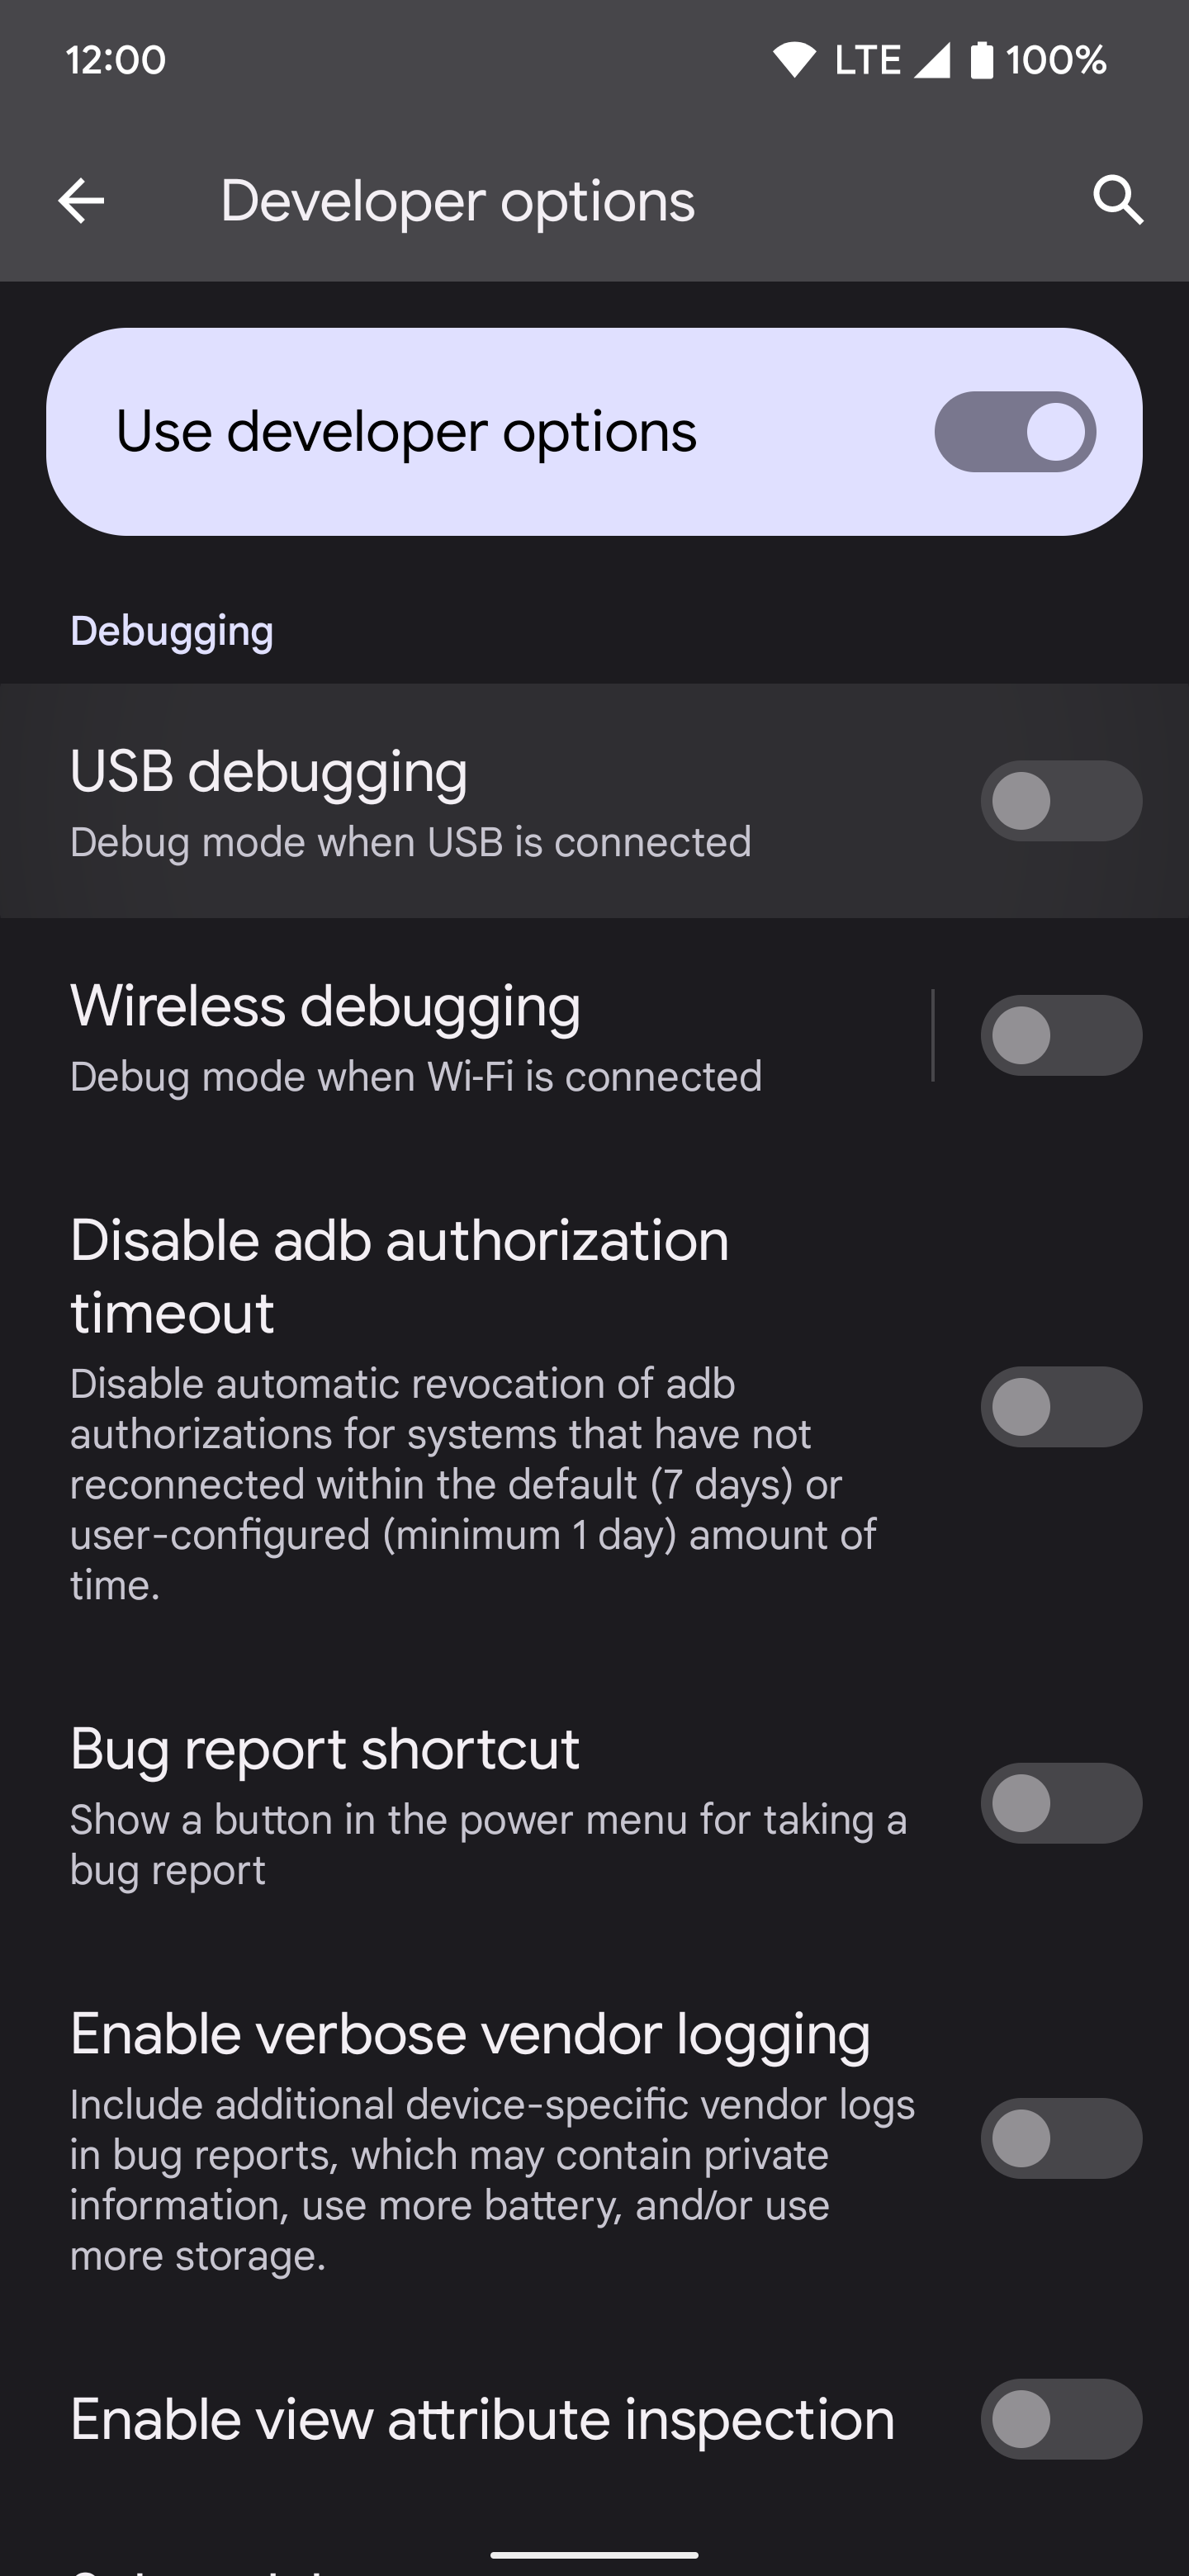 Enabling the wired USB debugging option.